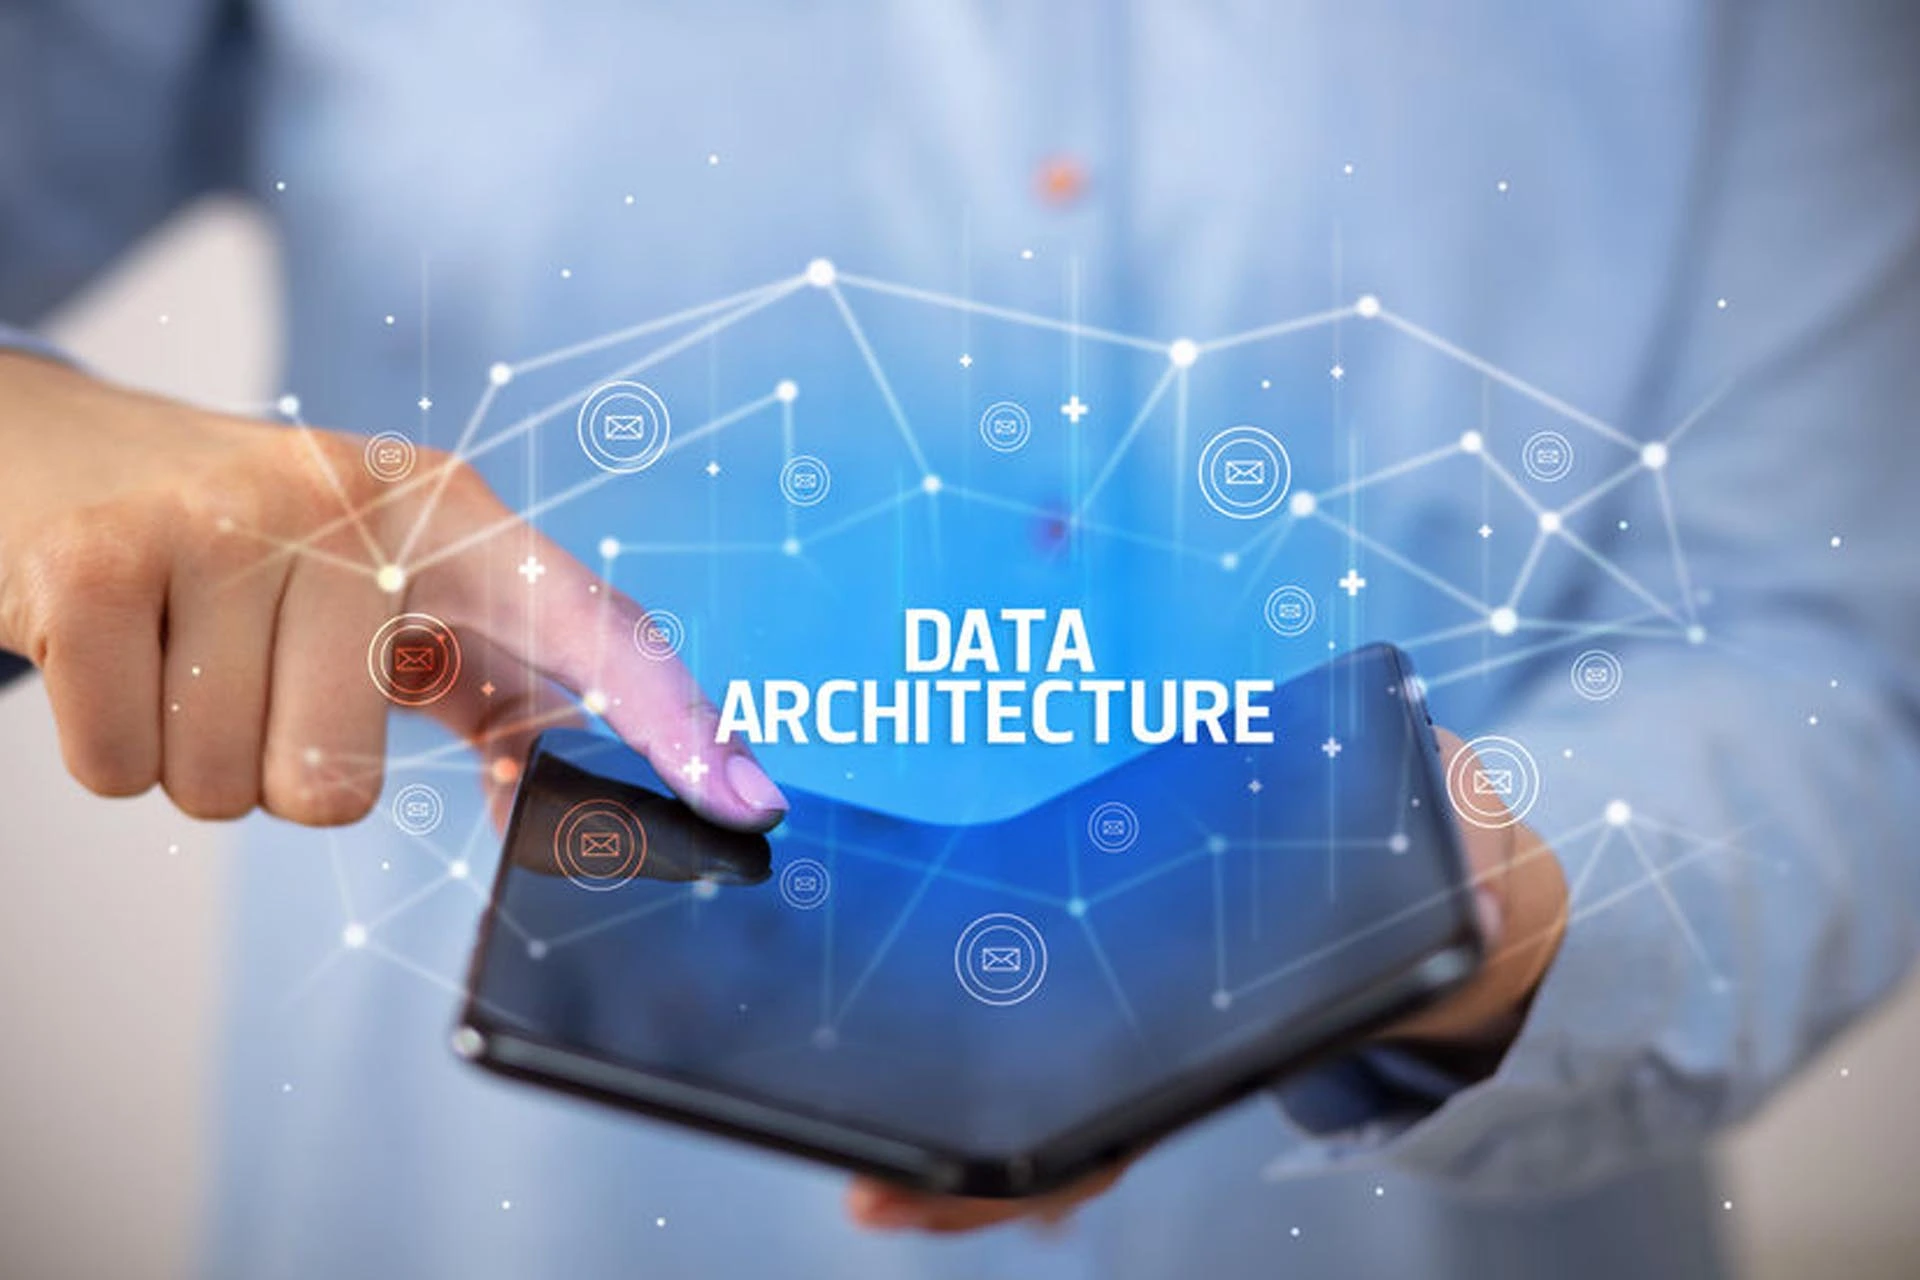 You can get a job in Data Architecture